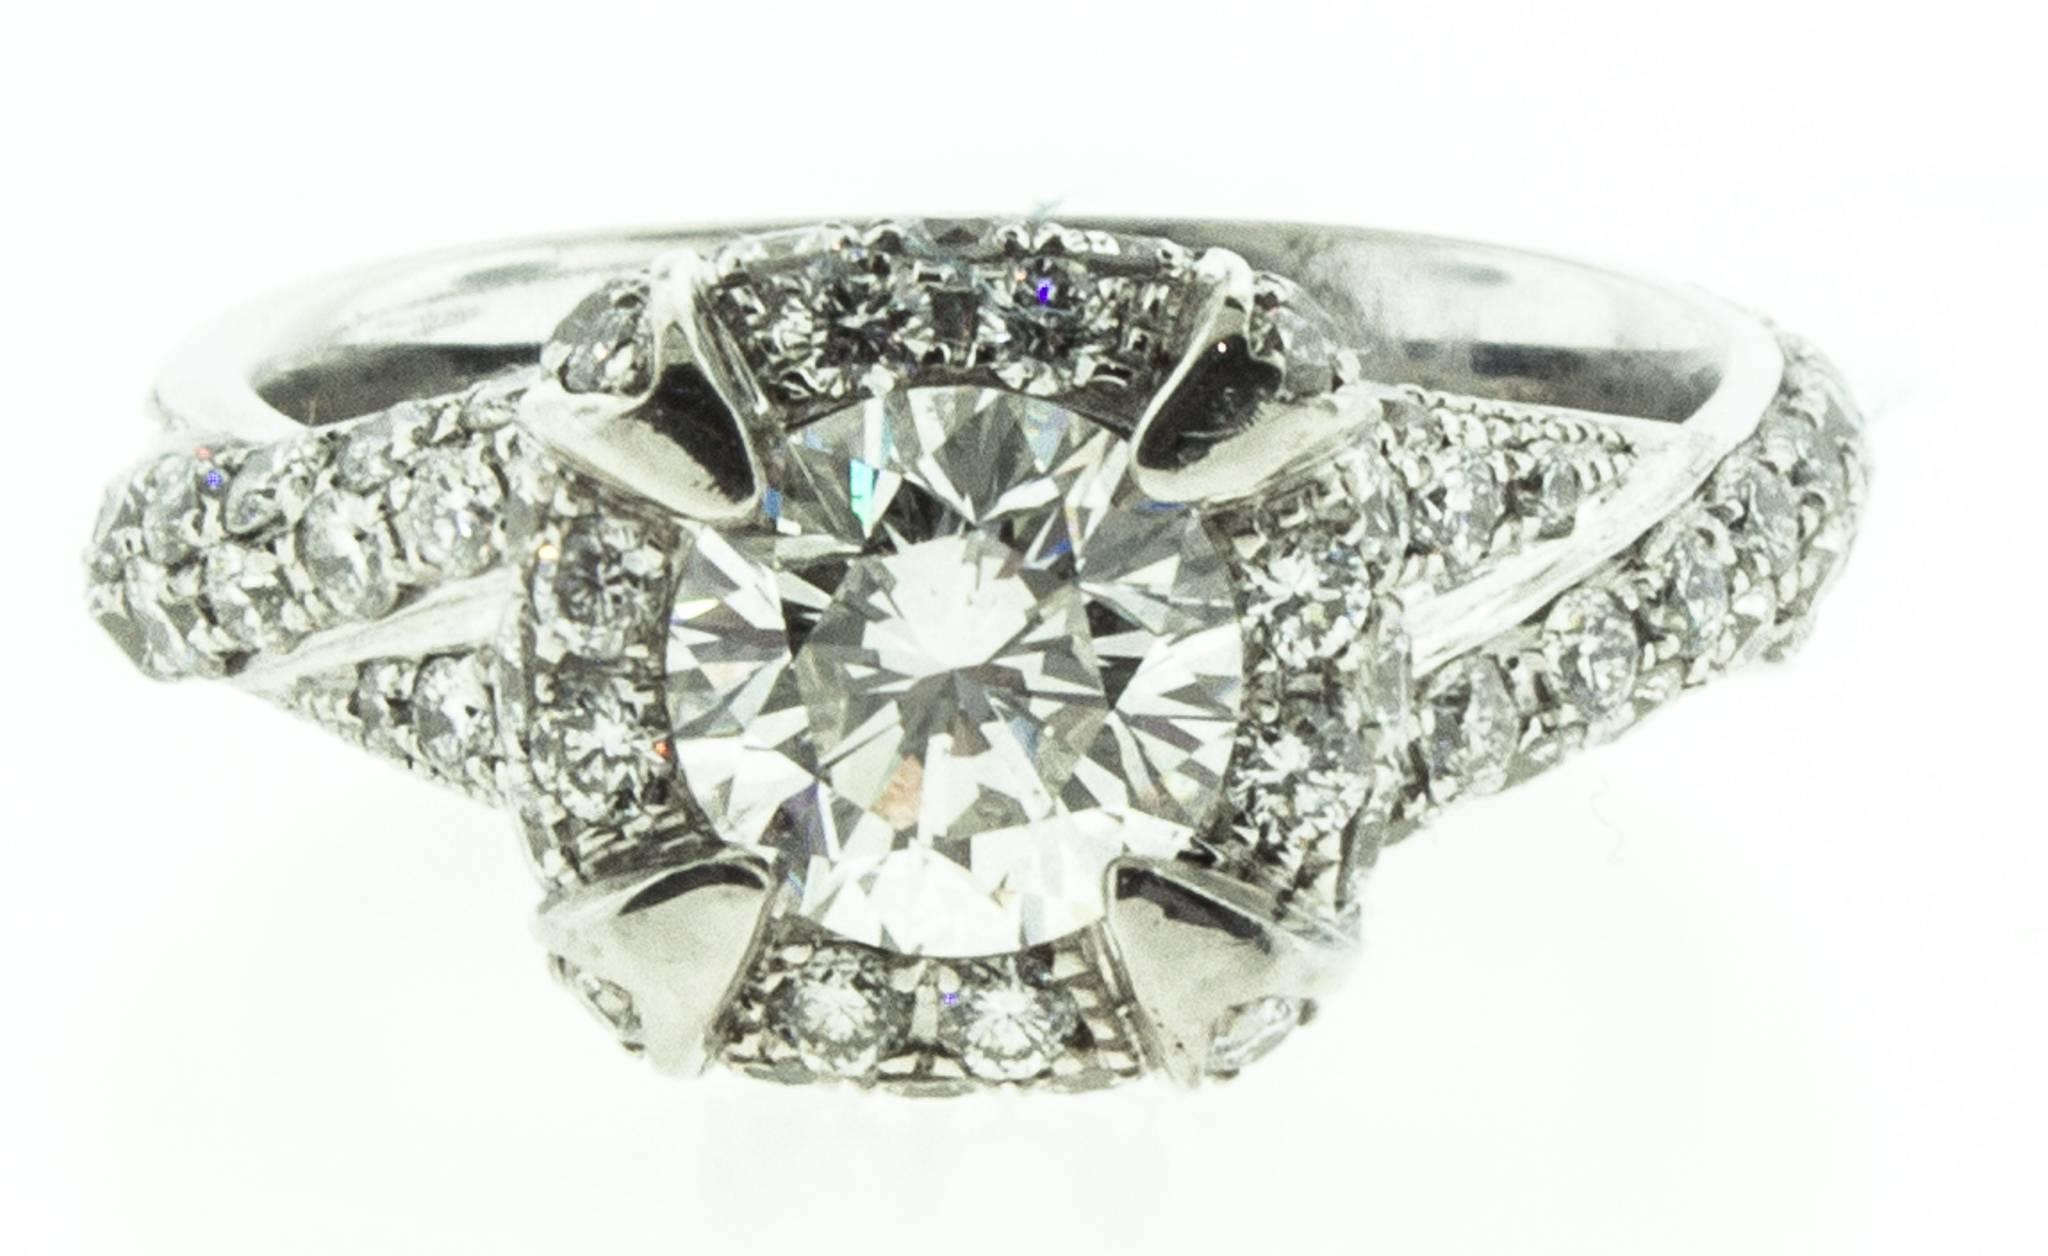 Platinum engagement ring elegantly designed and signed by Danuta, a Santa Fe based designer.  This beautiful ring is set with center Dia GIA certified 1 carat to center diamond G color VS1 clarity, and surround by pave diamonds of 1.5 carat total,